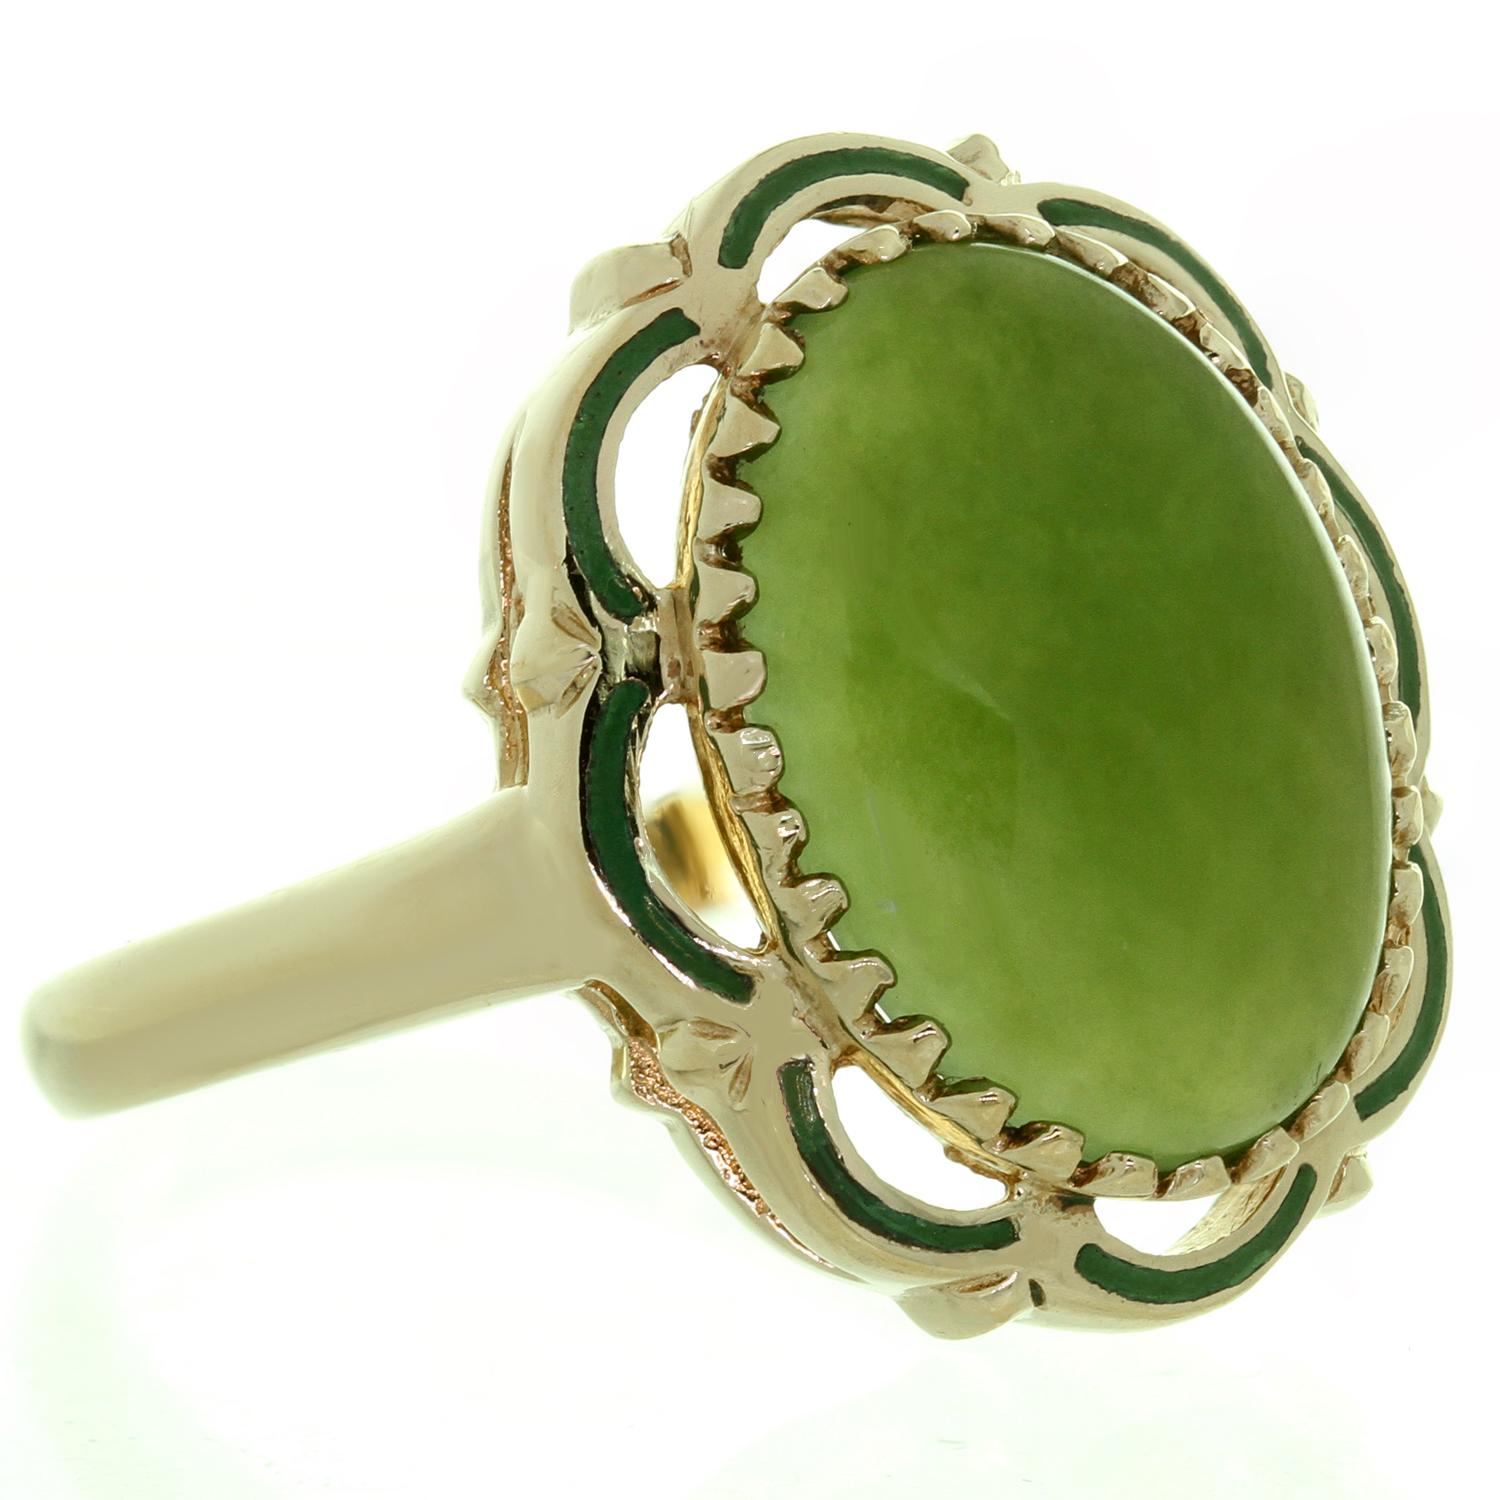 This classic estate collection ring is crafted in 10k yellow gold and is set with a cabochon green jade stone surrounded with a decorative green enamel border. The enamel has a small pinpoint deficiency. Made in United States circa 1960s.